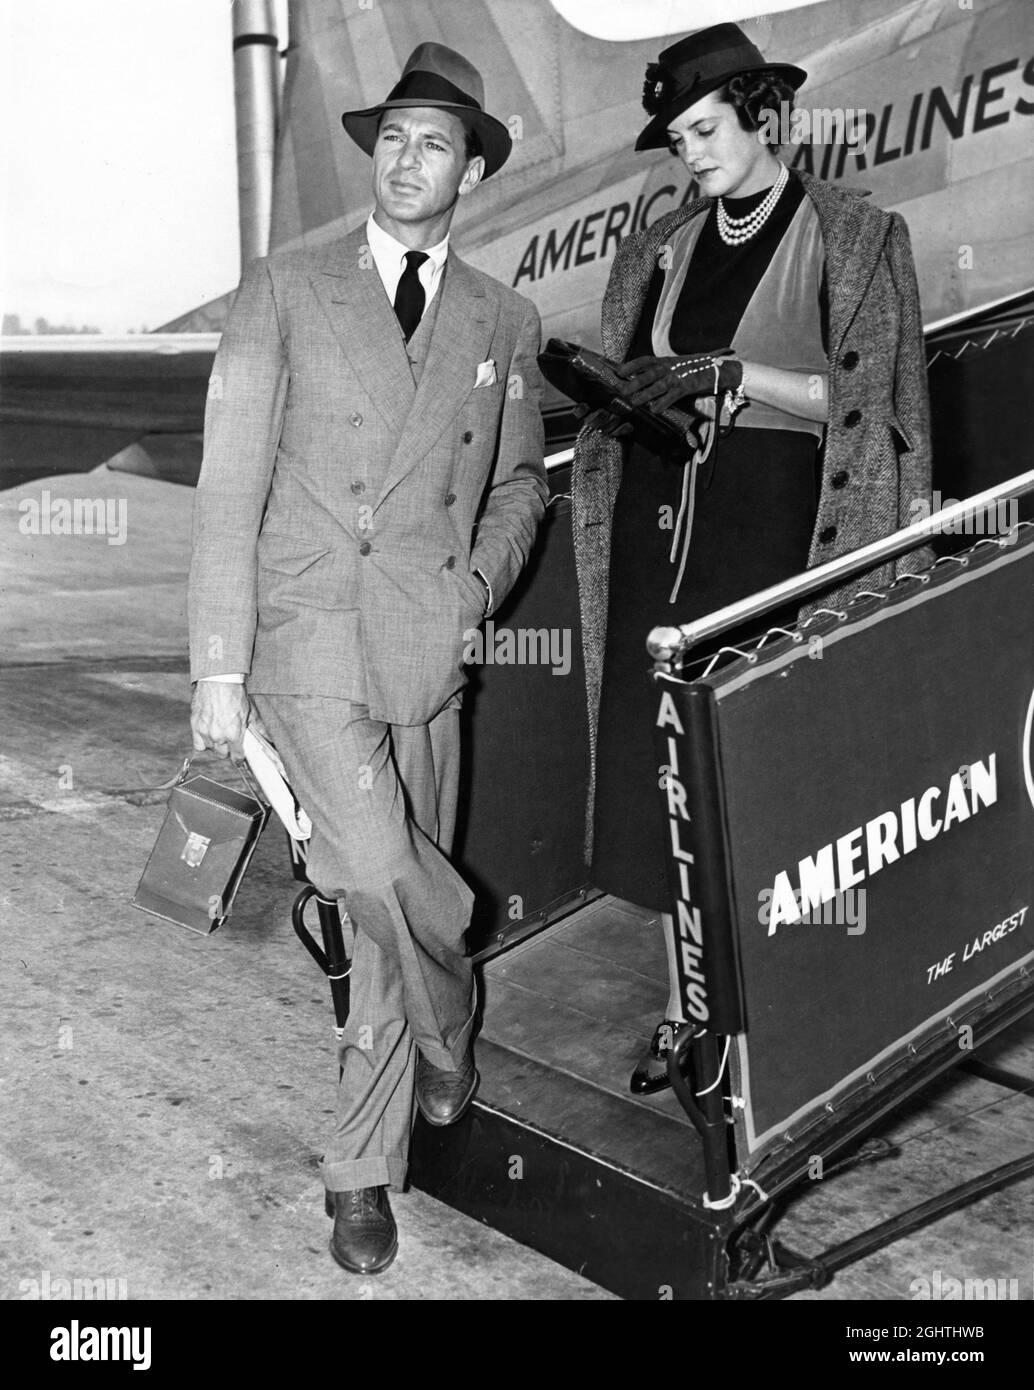 GARY COOPER and His Wife VERONICA BALFE aka SANDRA SHAW aka ROCKY COOPER circa 1938 next to gangway to an American Airlines Aircraft Stock Photo